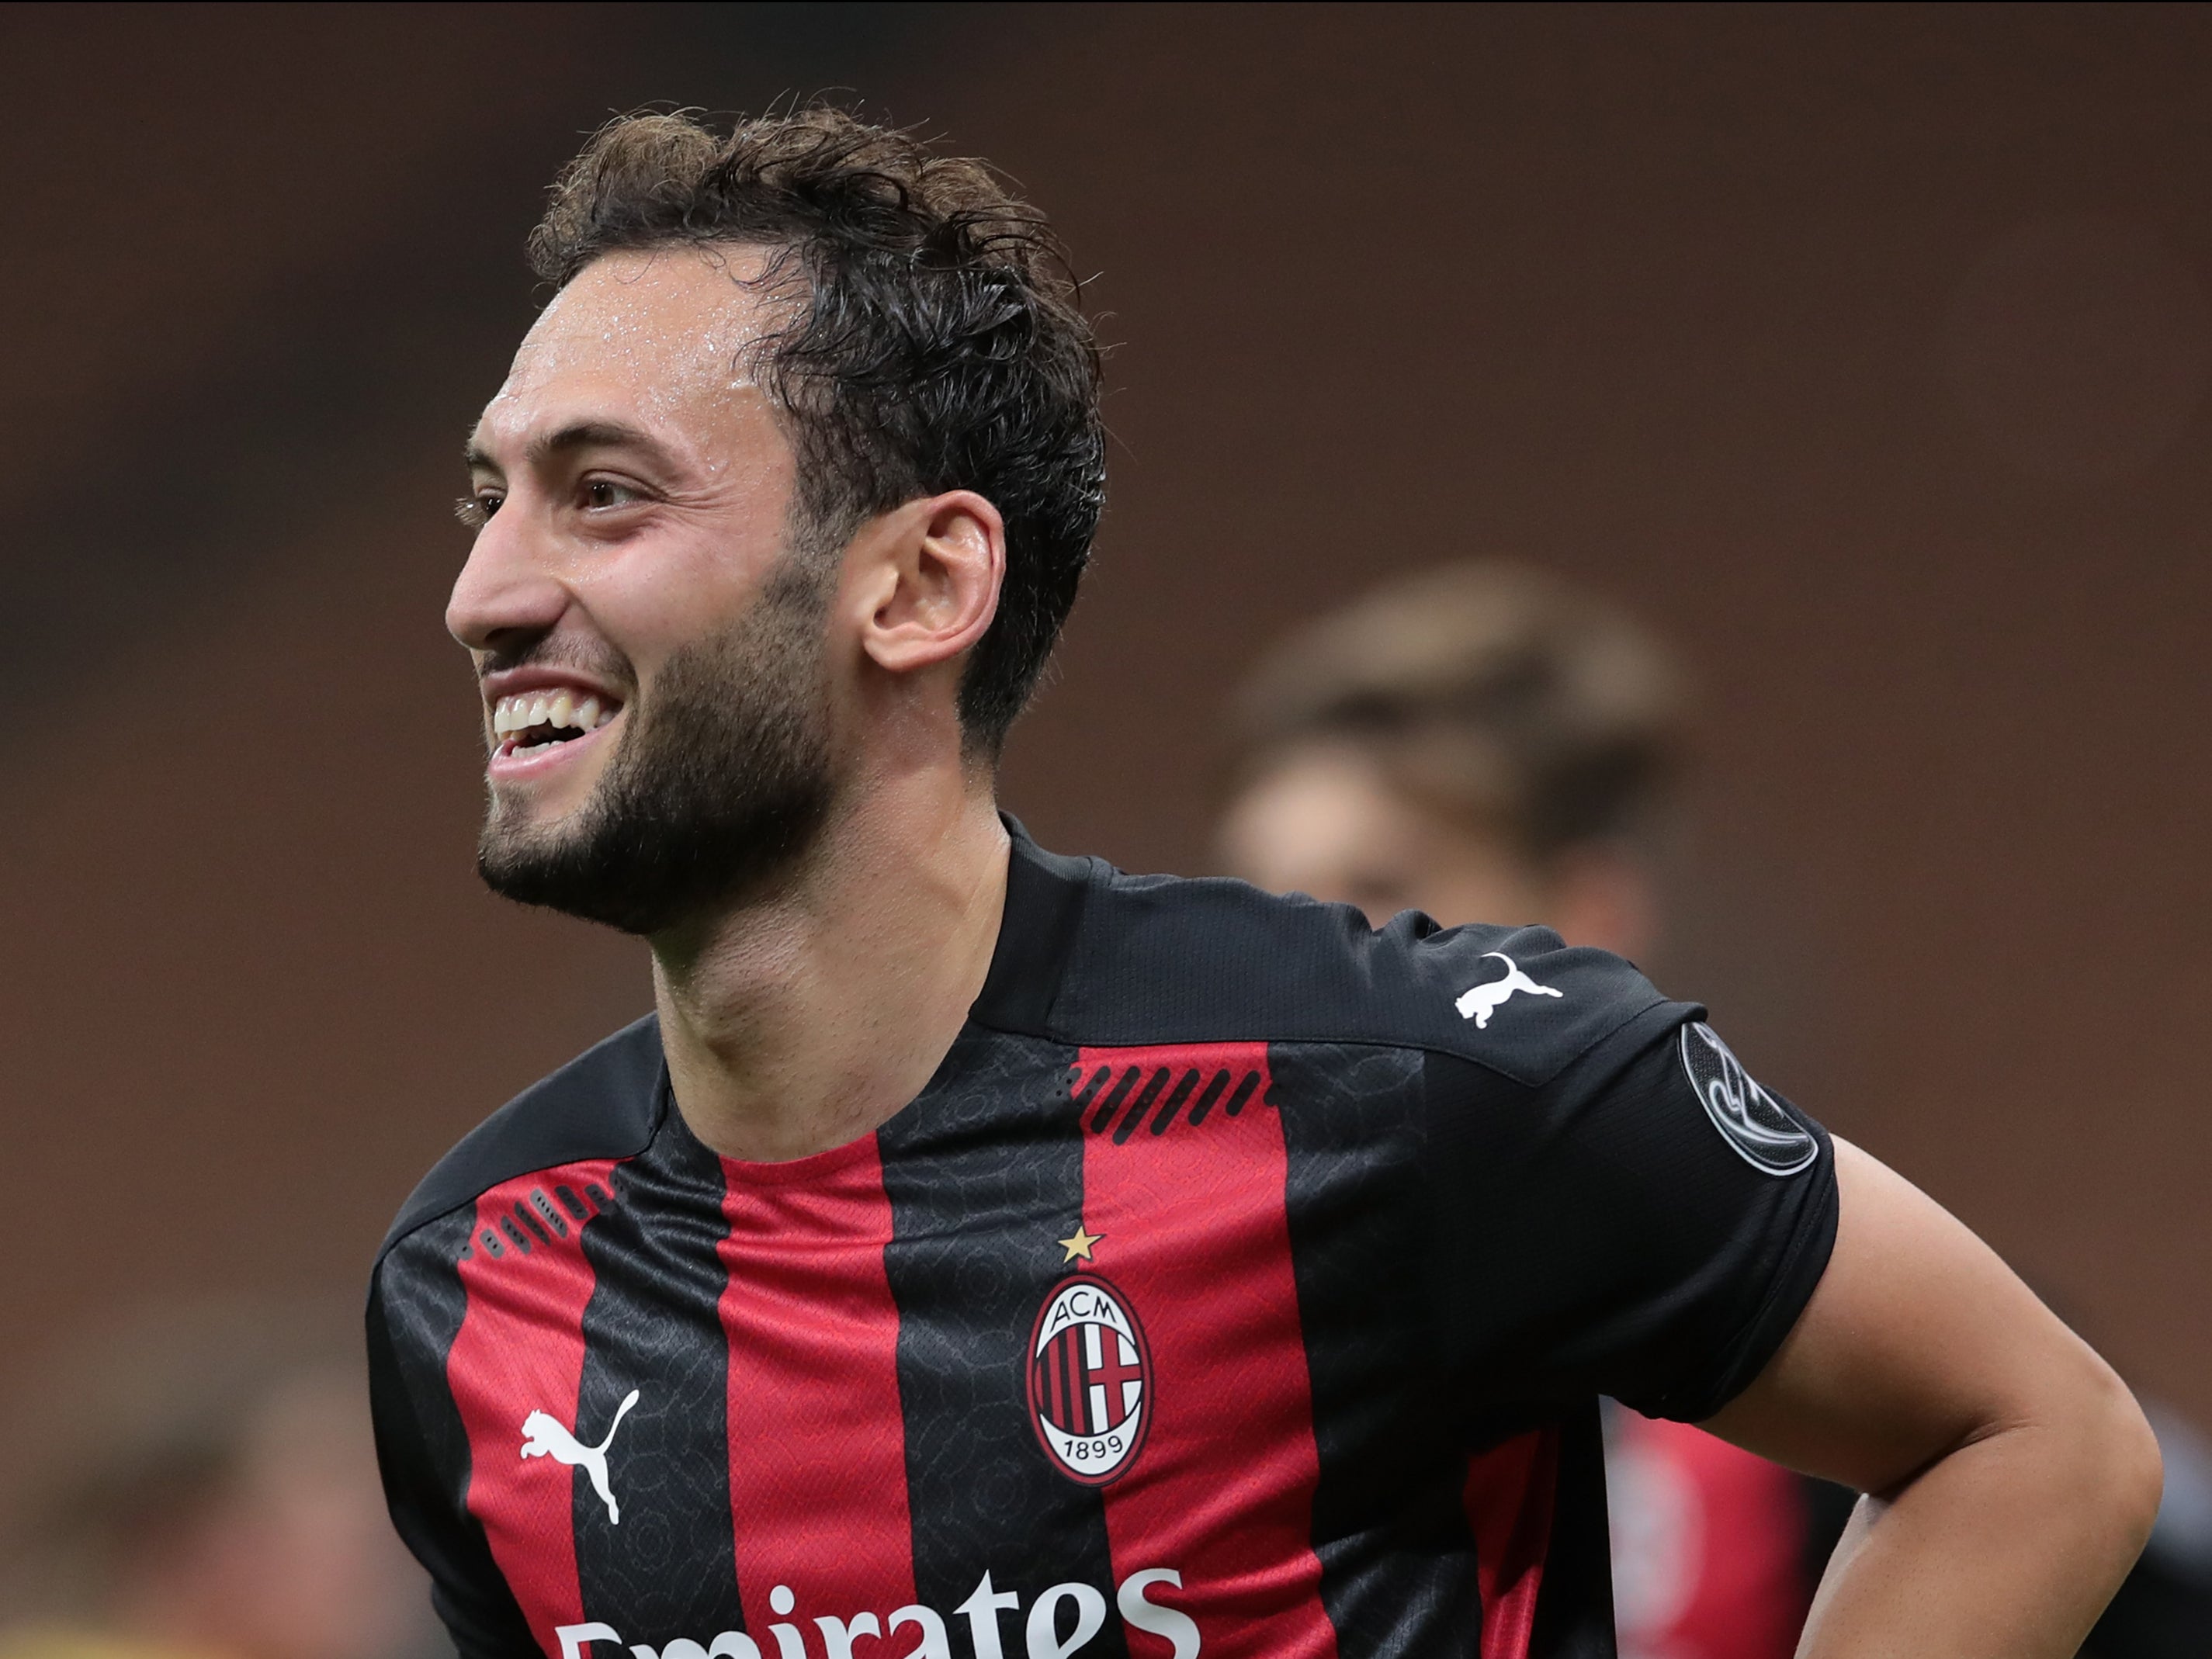 Hakan Calhanoglu is a reported transfer target for Manchester United